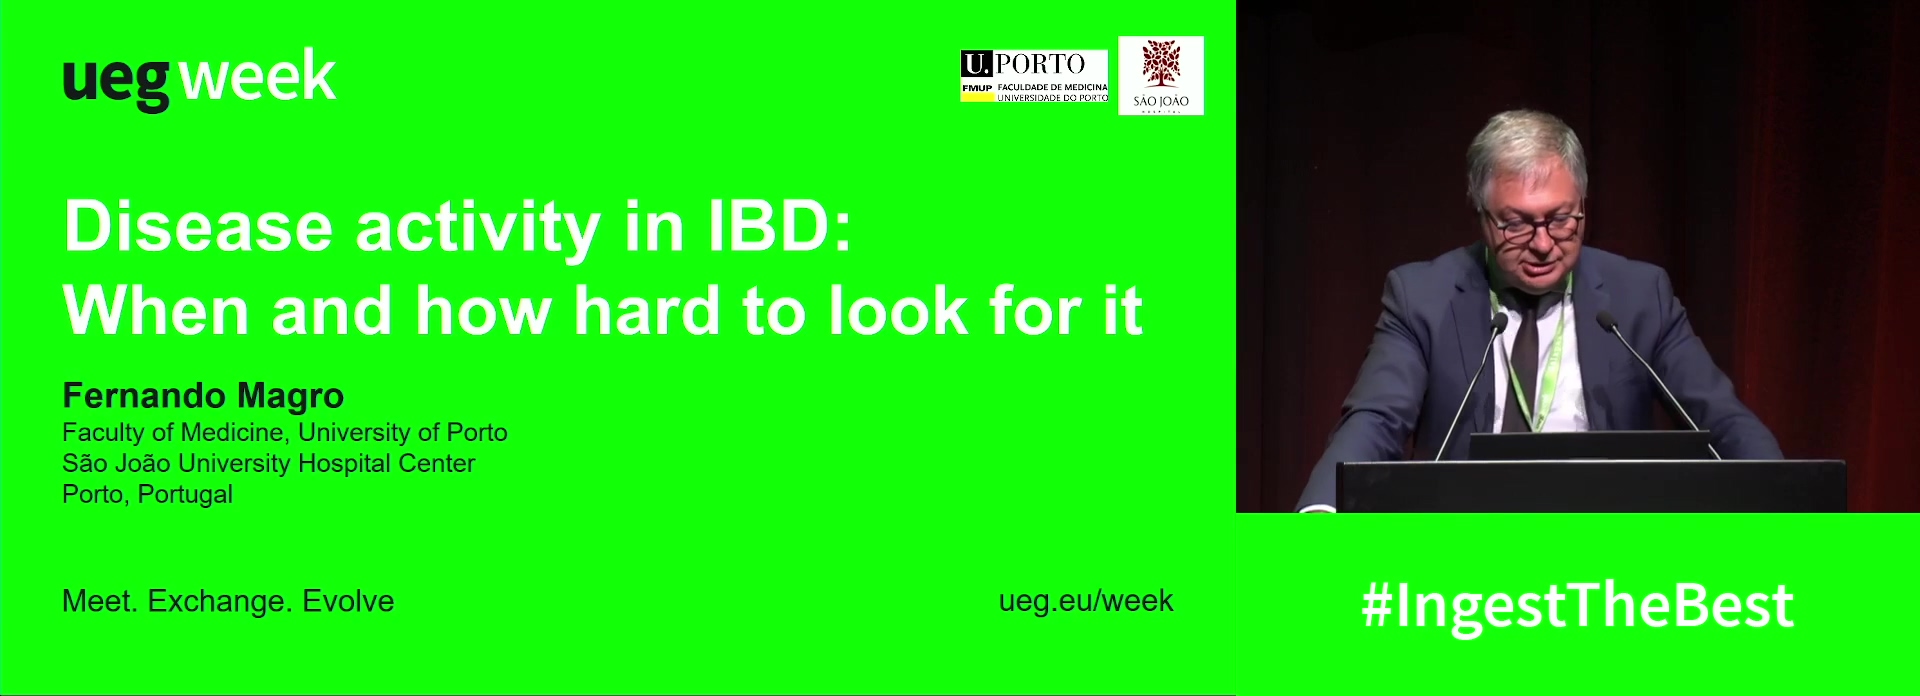 Summary: Disease activity in IBD - When and how hard to look for it?